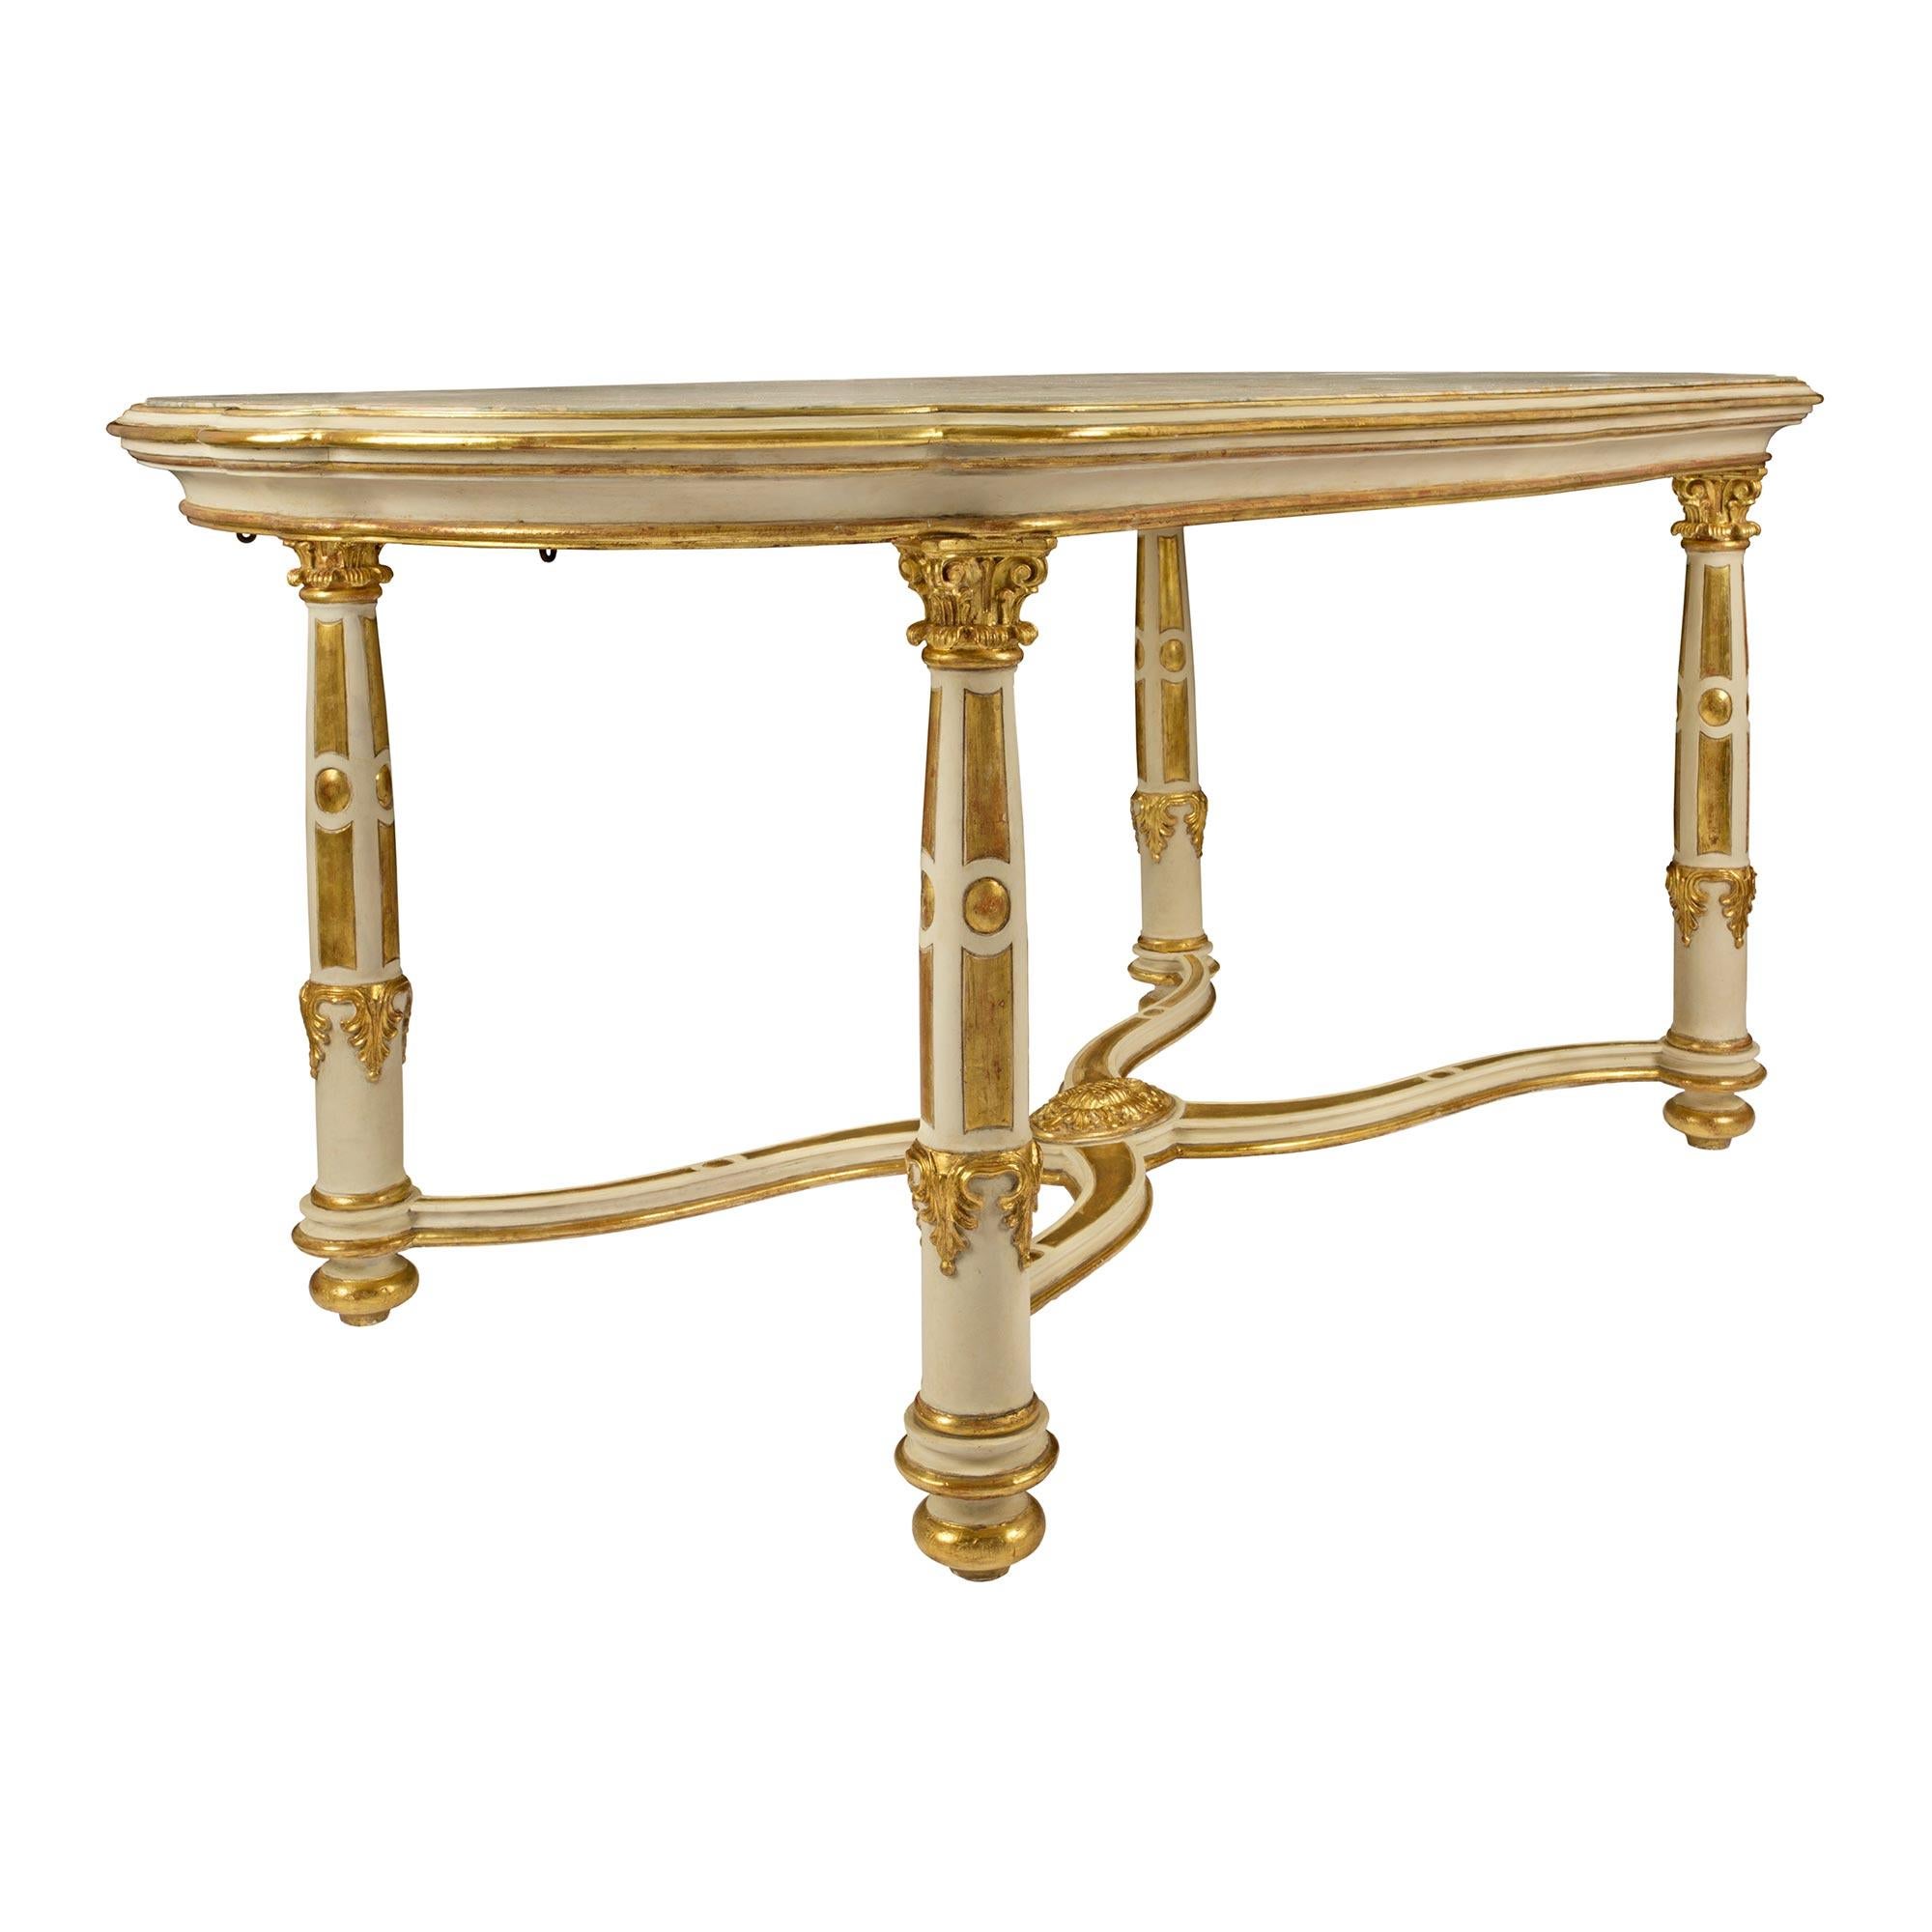 Patinated Italian 19th Century Louis XVI Style Giltwood and Marble Center Table For Sale